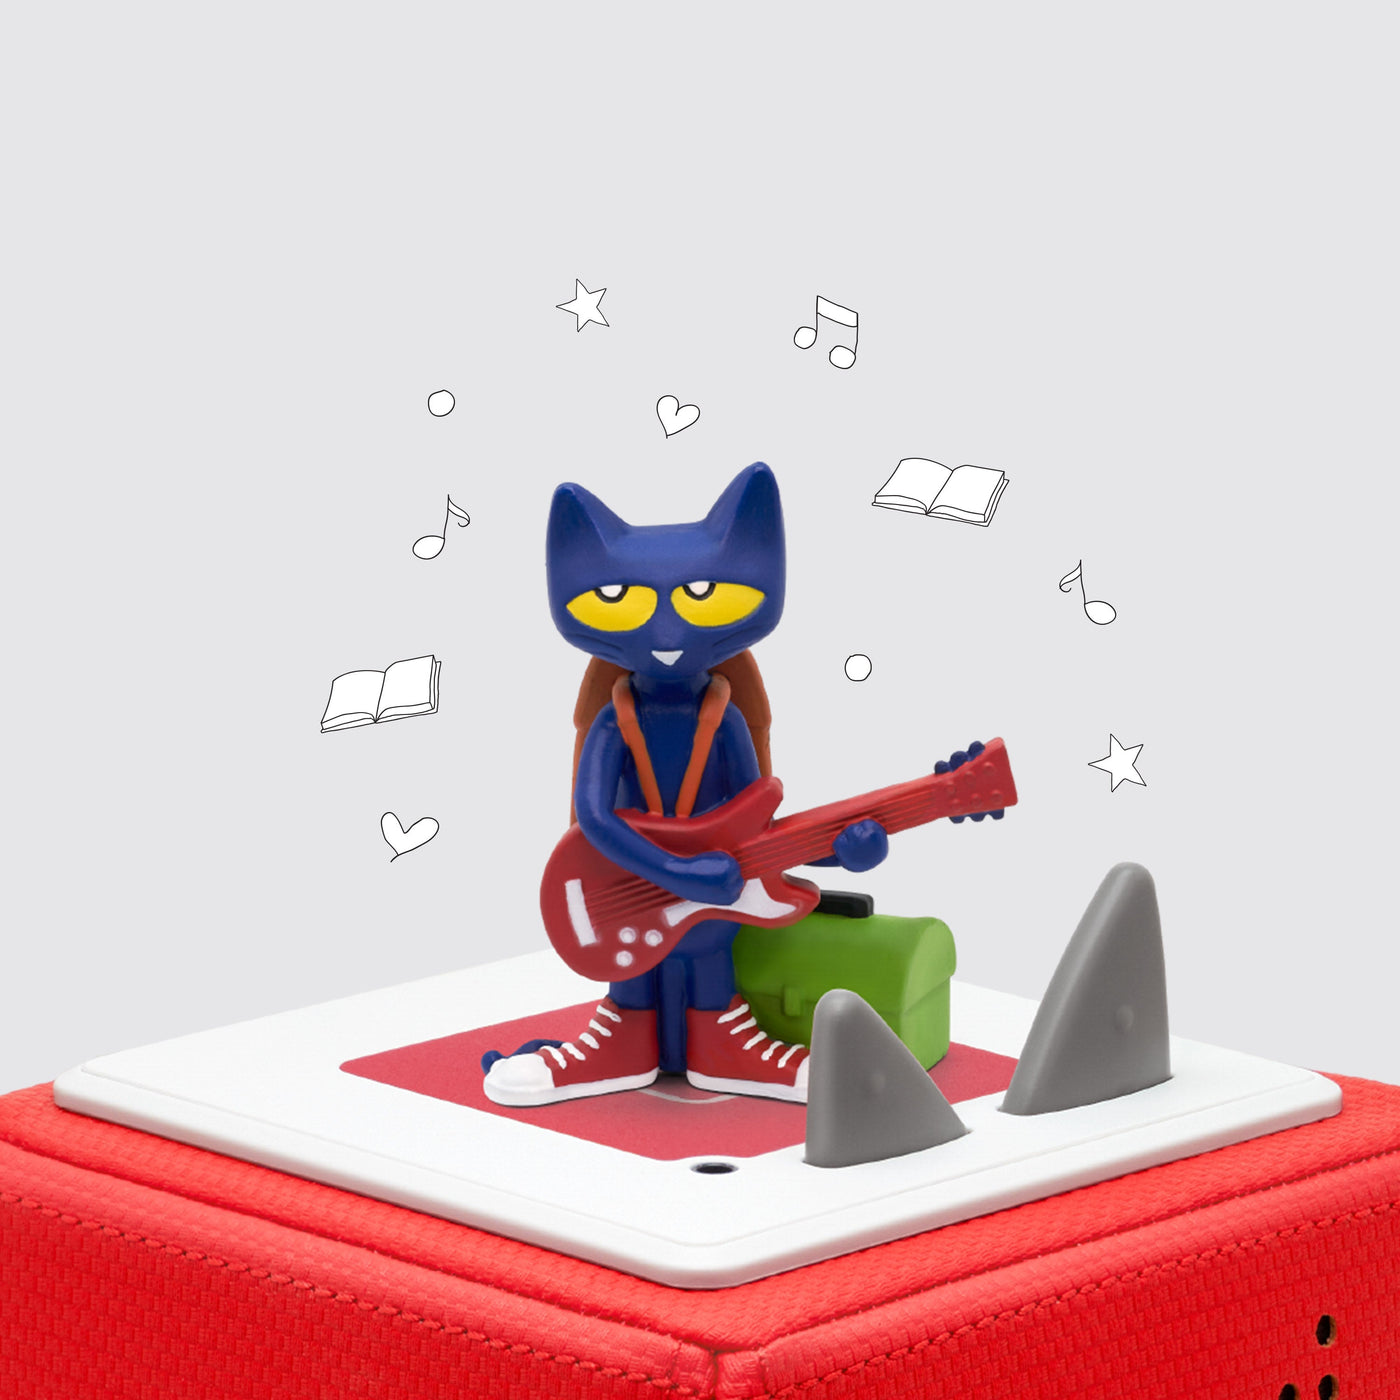 Tonies Audio Play Character: Rock On - Pete the Cat